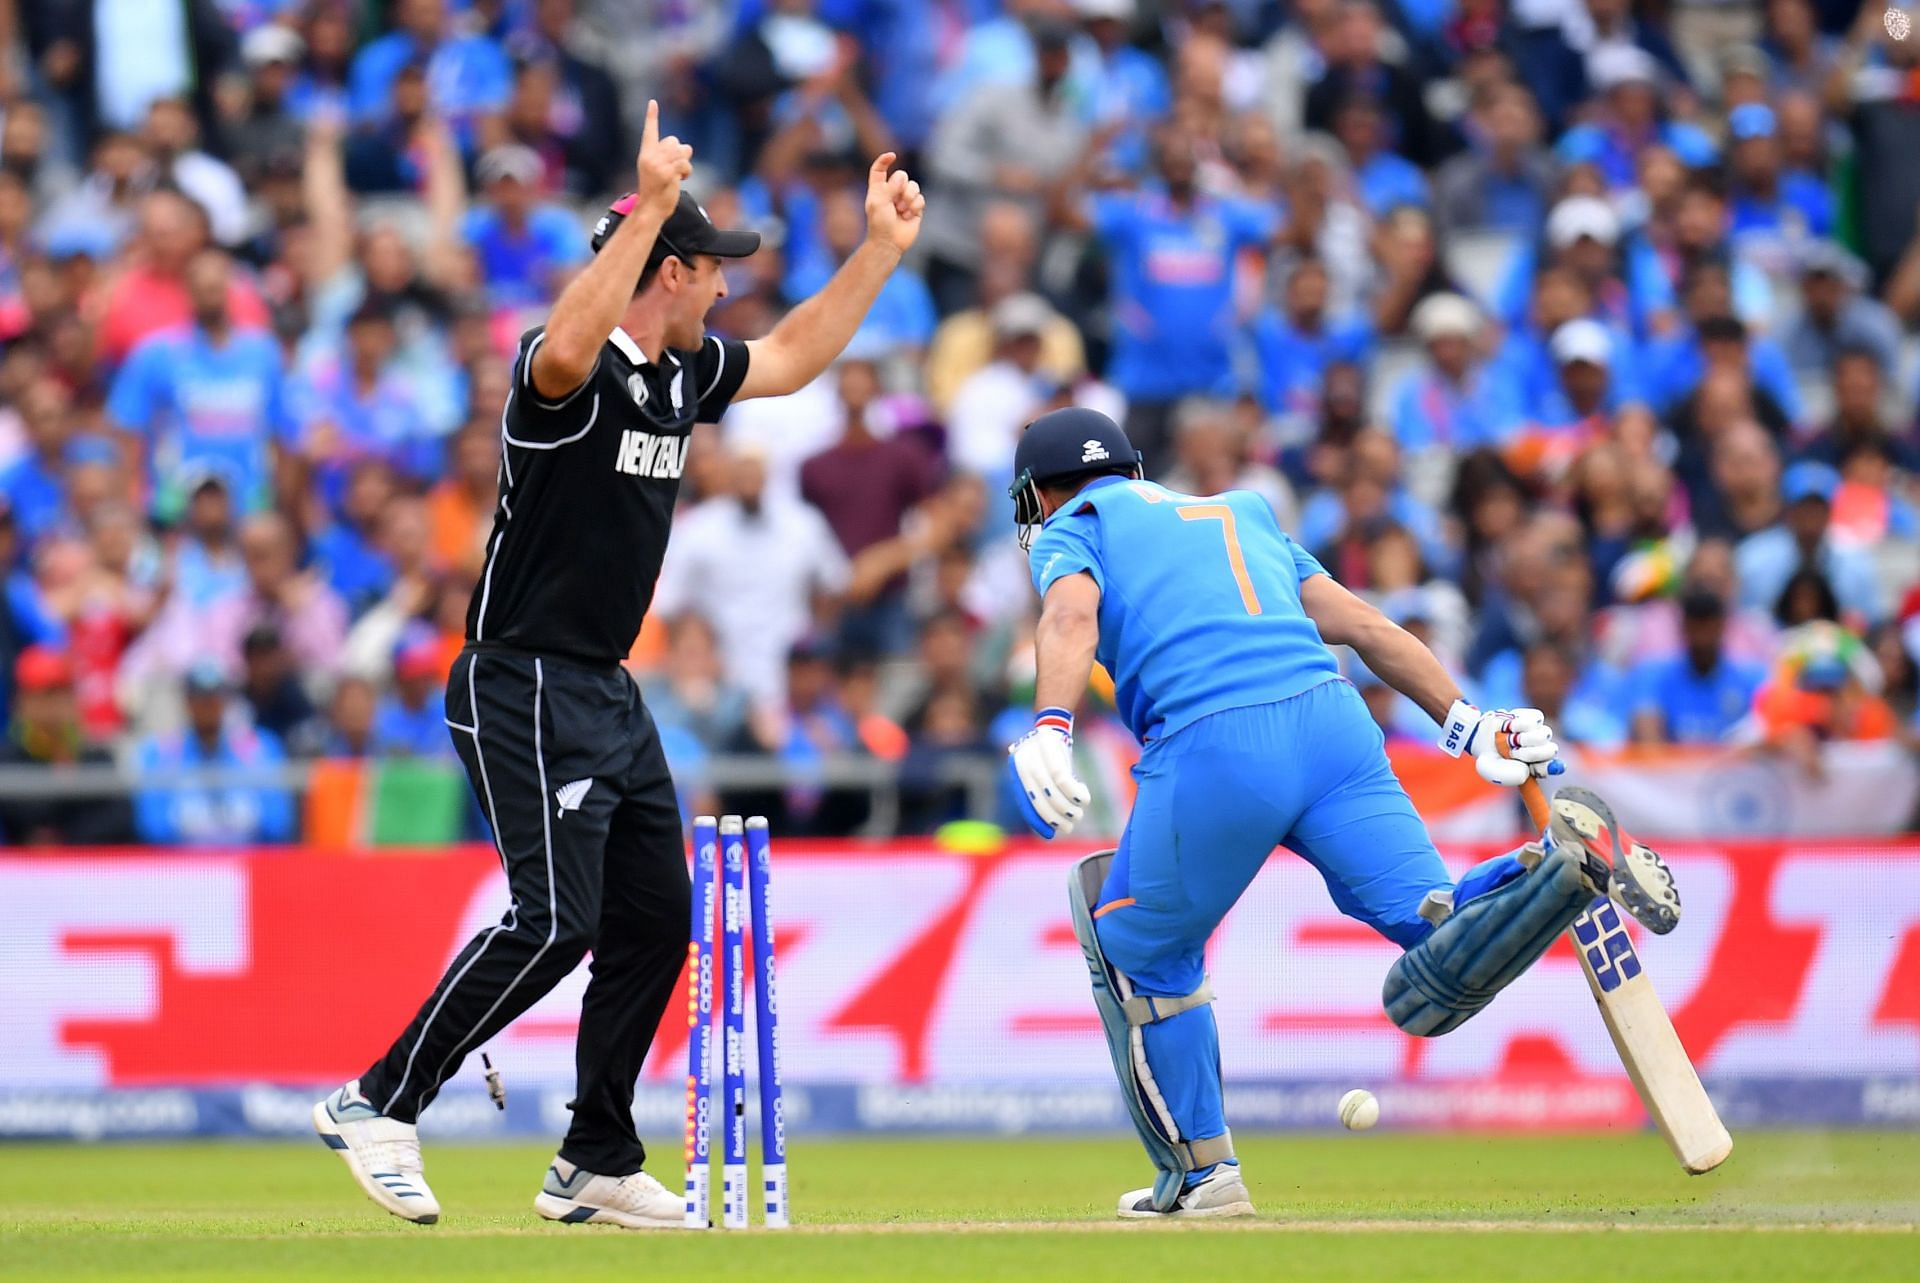 MS Dhoni&#039;s run-out in the 2019 World Cup semi-final was a game-defining moment.